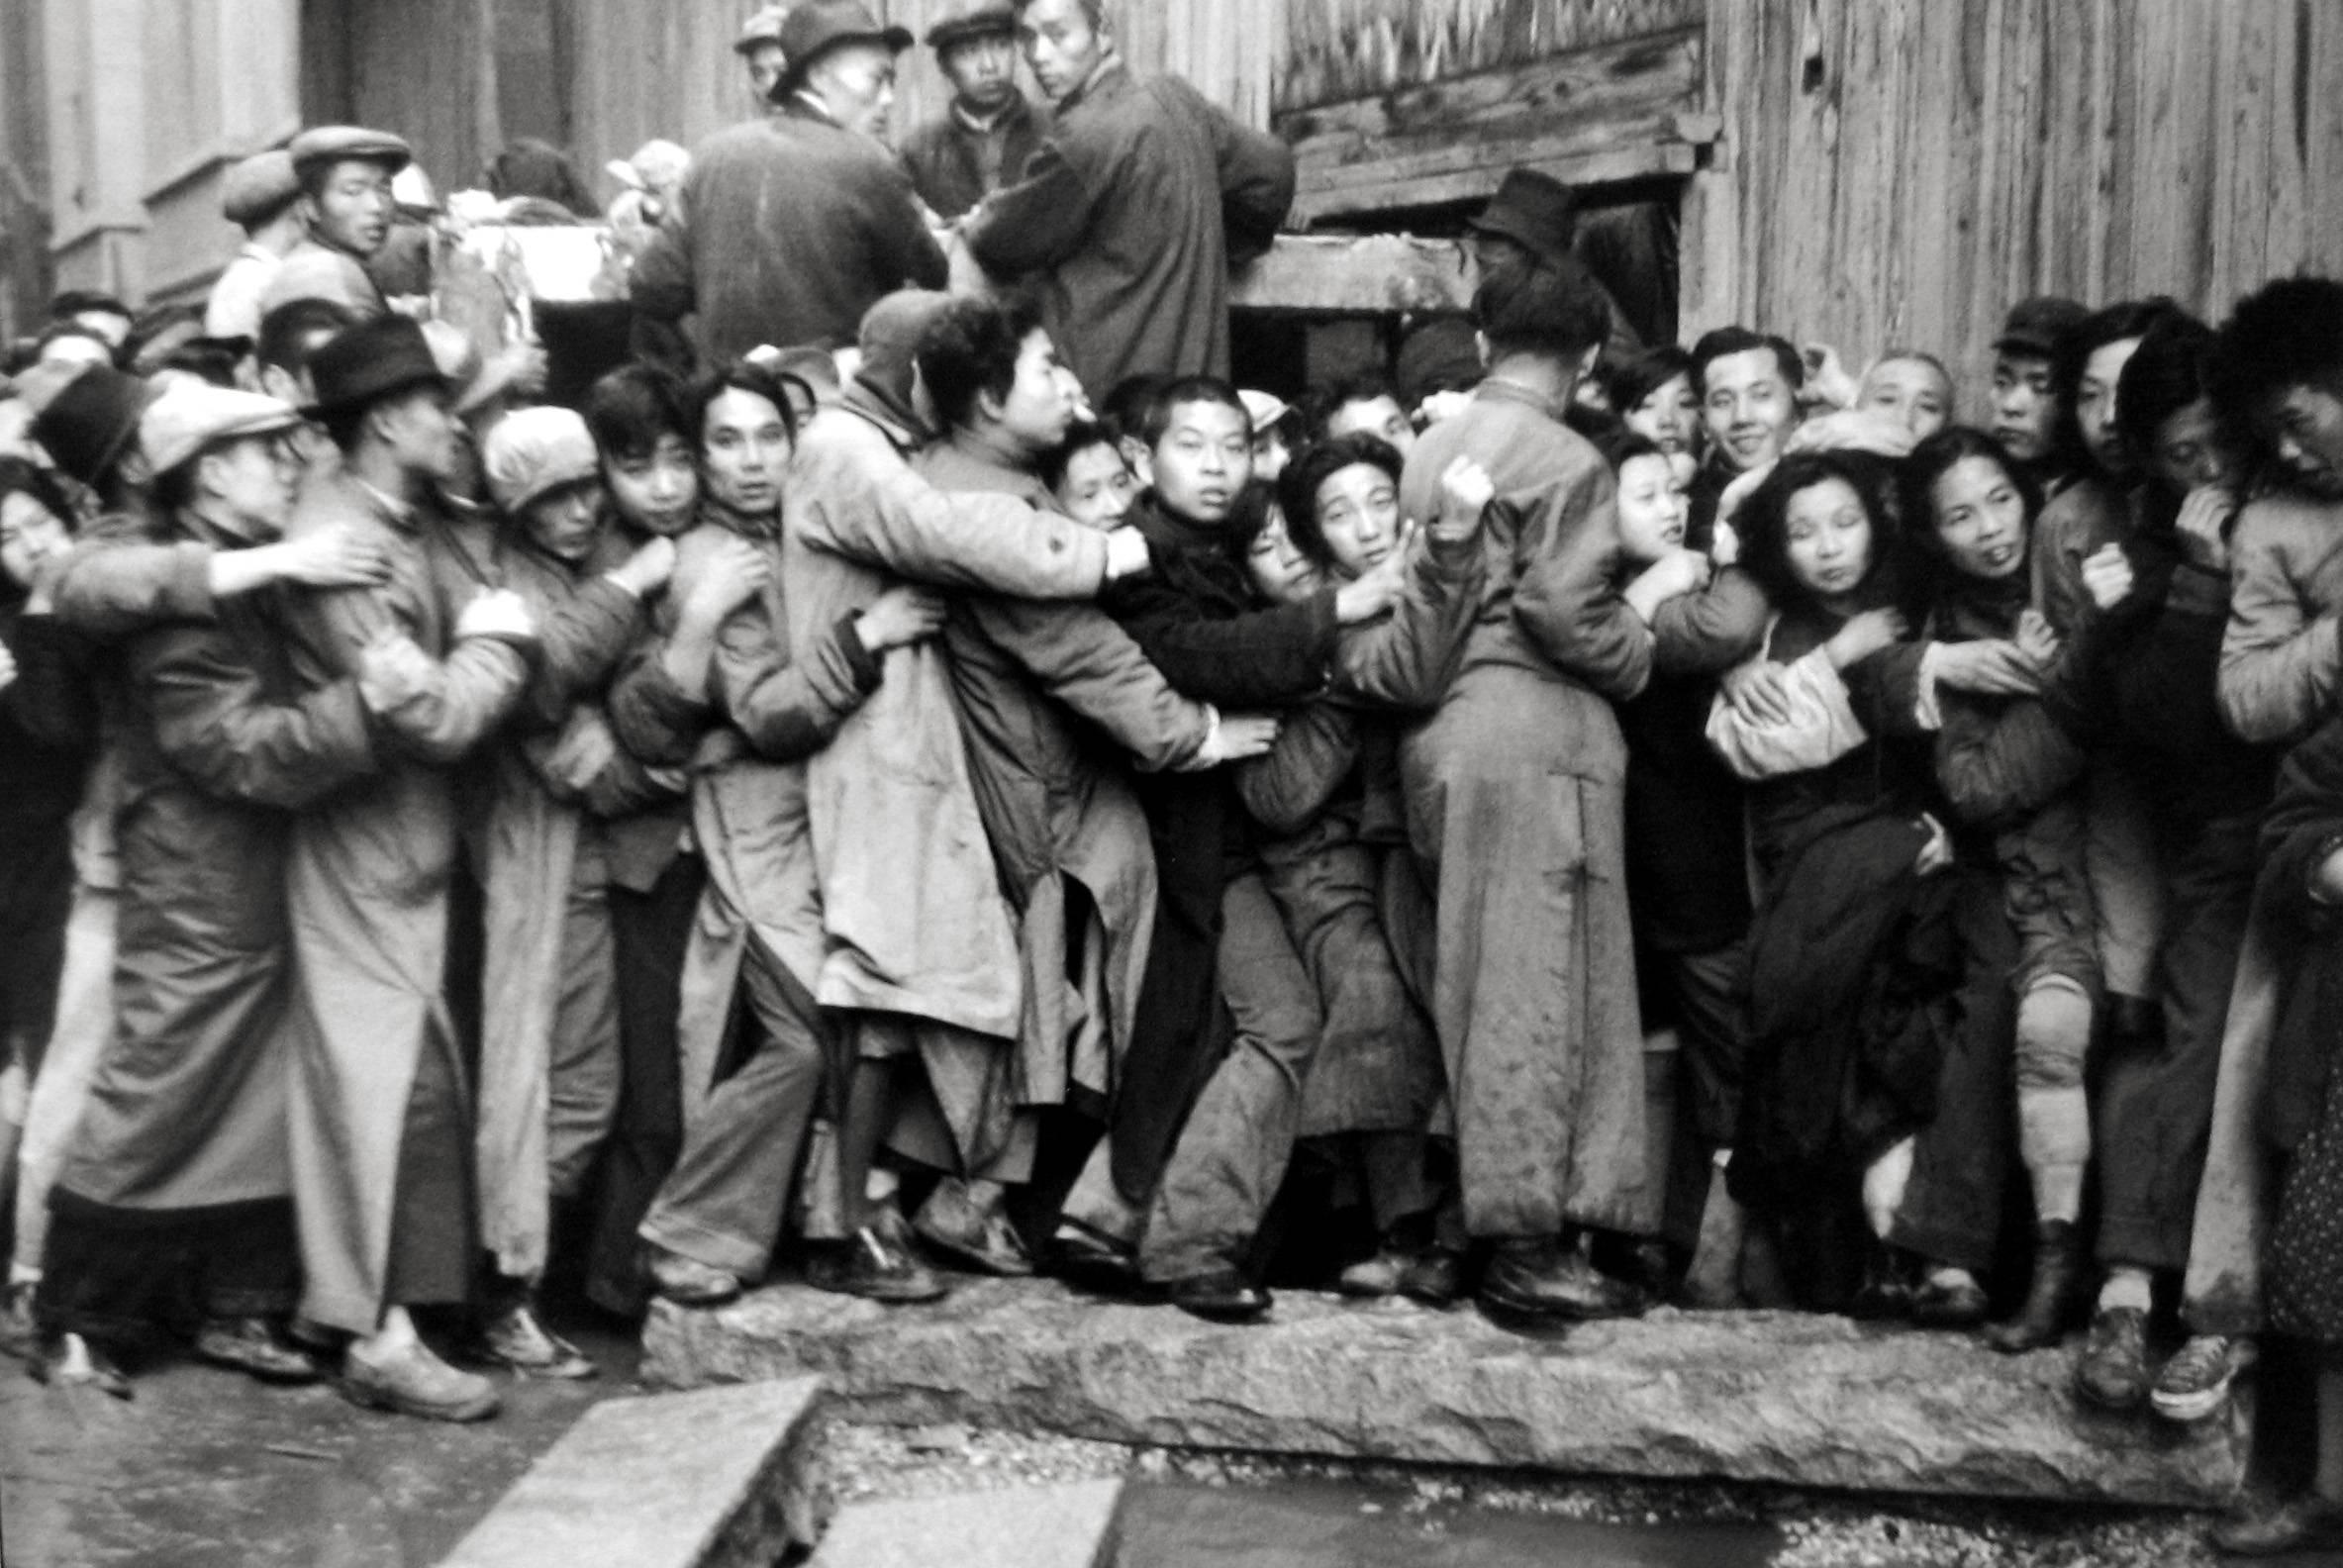 Henri Cartier-Bresson Black and White Photograph - The Last Days of the Kuomintang, China